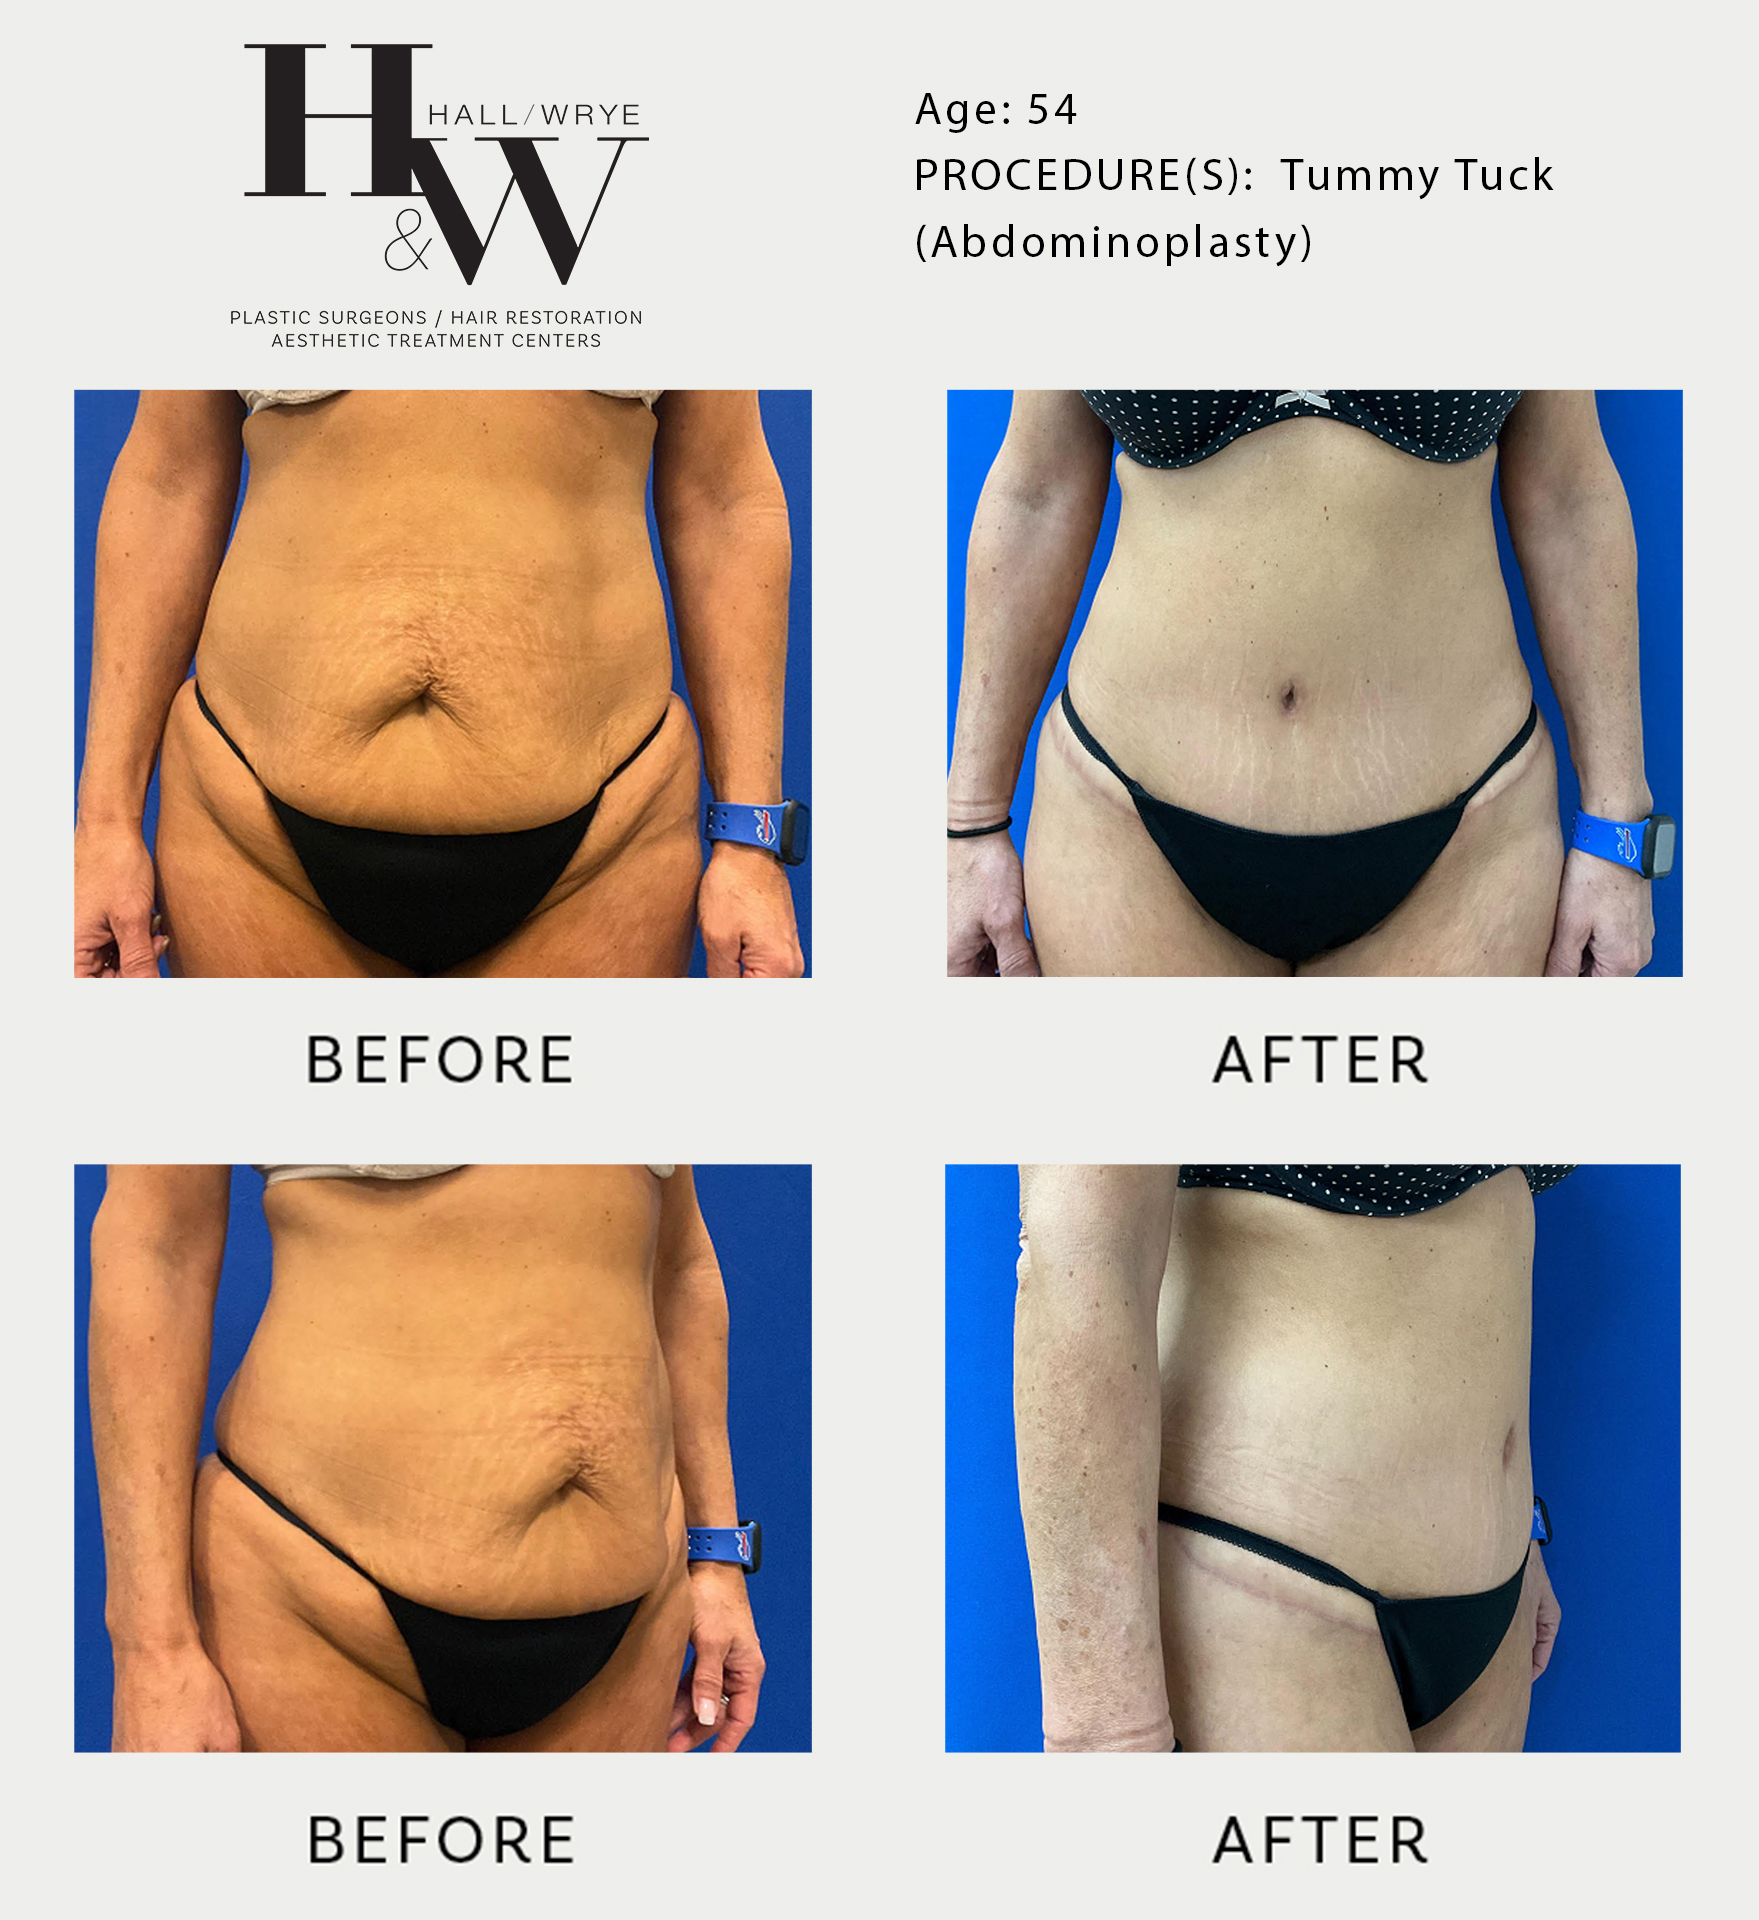 LIPOSUCTION VS. TUMMY TUCK - Hall & Wrye – Plastic Surgery and Medical Spa  in Reno NV, Breast Implants and Breast Augmentation, Liposuction, Tummy- Tucks, Dermal Fillers, Hair Transplants and more! Licensed Reno